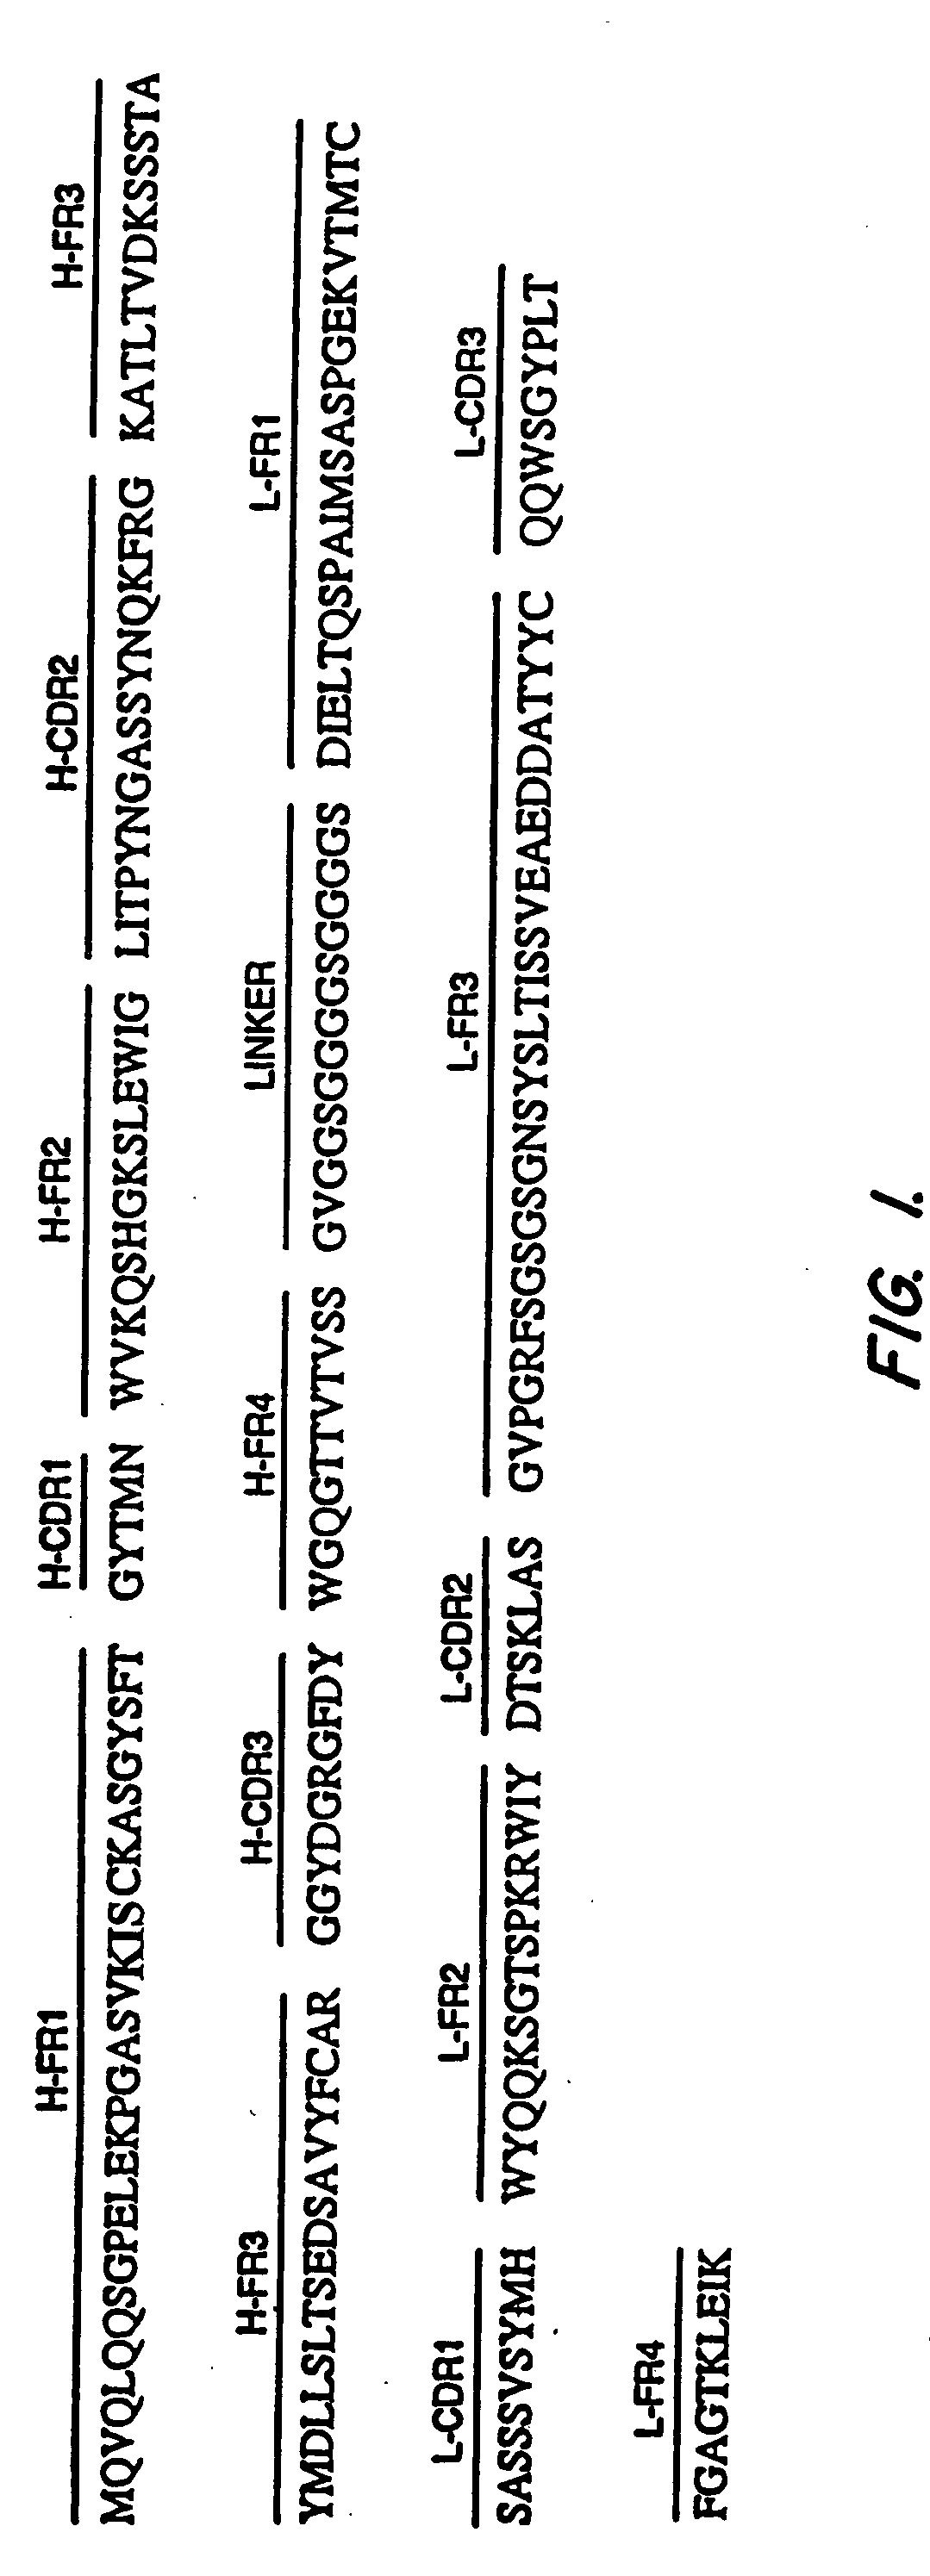 Antibodies, including FV molecules, and immunoconjugates having high binding affinity for mesothelin and methods for their use